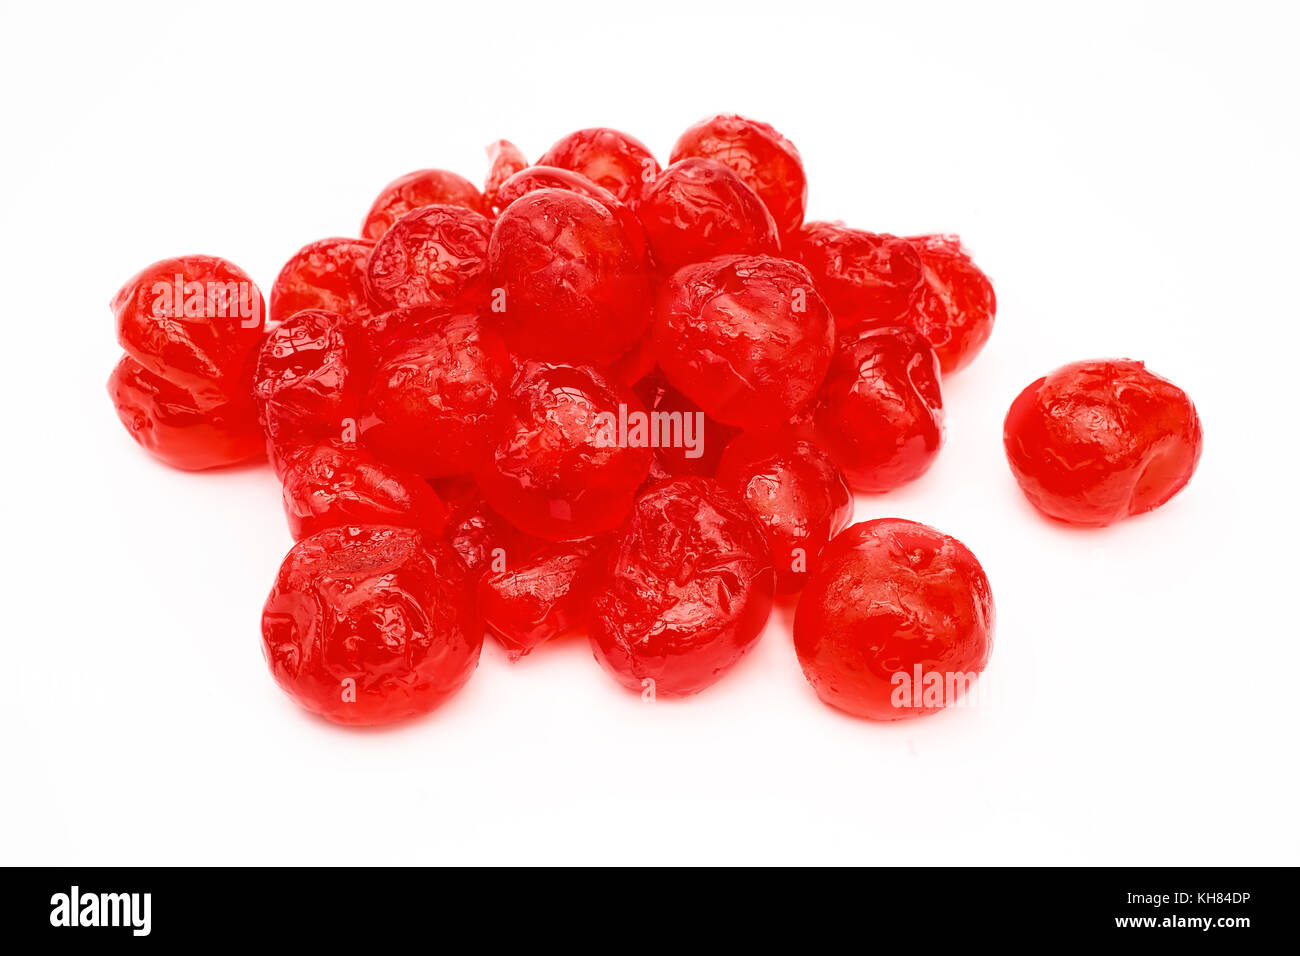 Sweet candied cherries measured for Christmas baking especially fruitcakes. Stock Photo